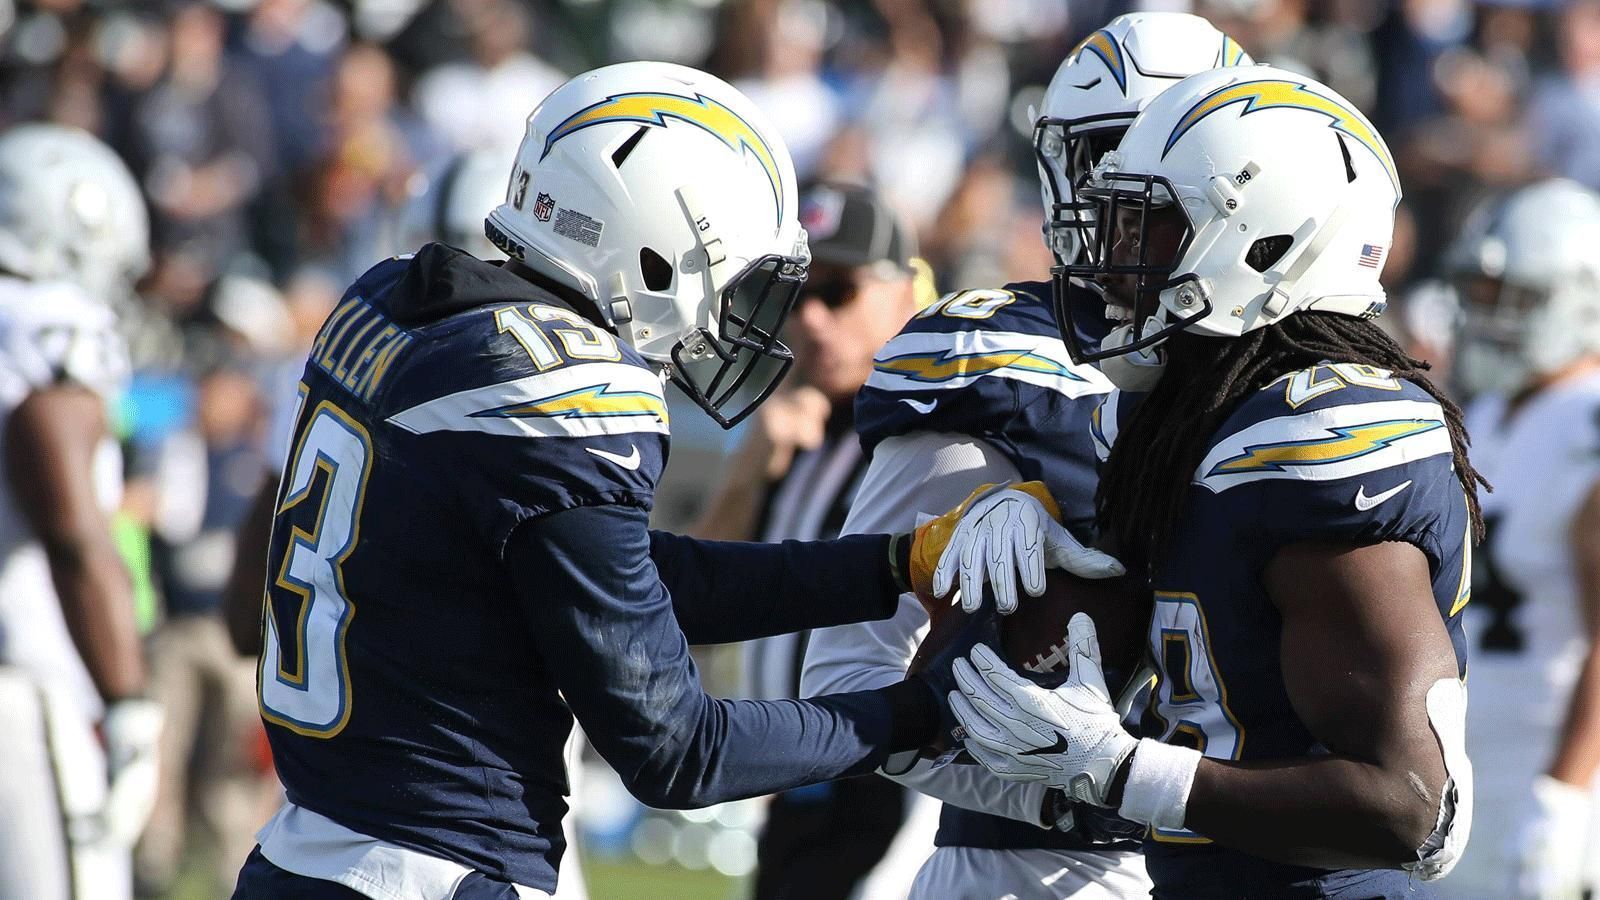 
                <strong>Los Angeles Chargers</strong><br>
                2018: 25.8 (14)     2017: 25.7 (8)     2016: 25.7 (9)     2015: 26.3 (21)     2014: 26.6 (28)     2013: 26.3 (21)
              